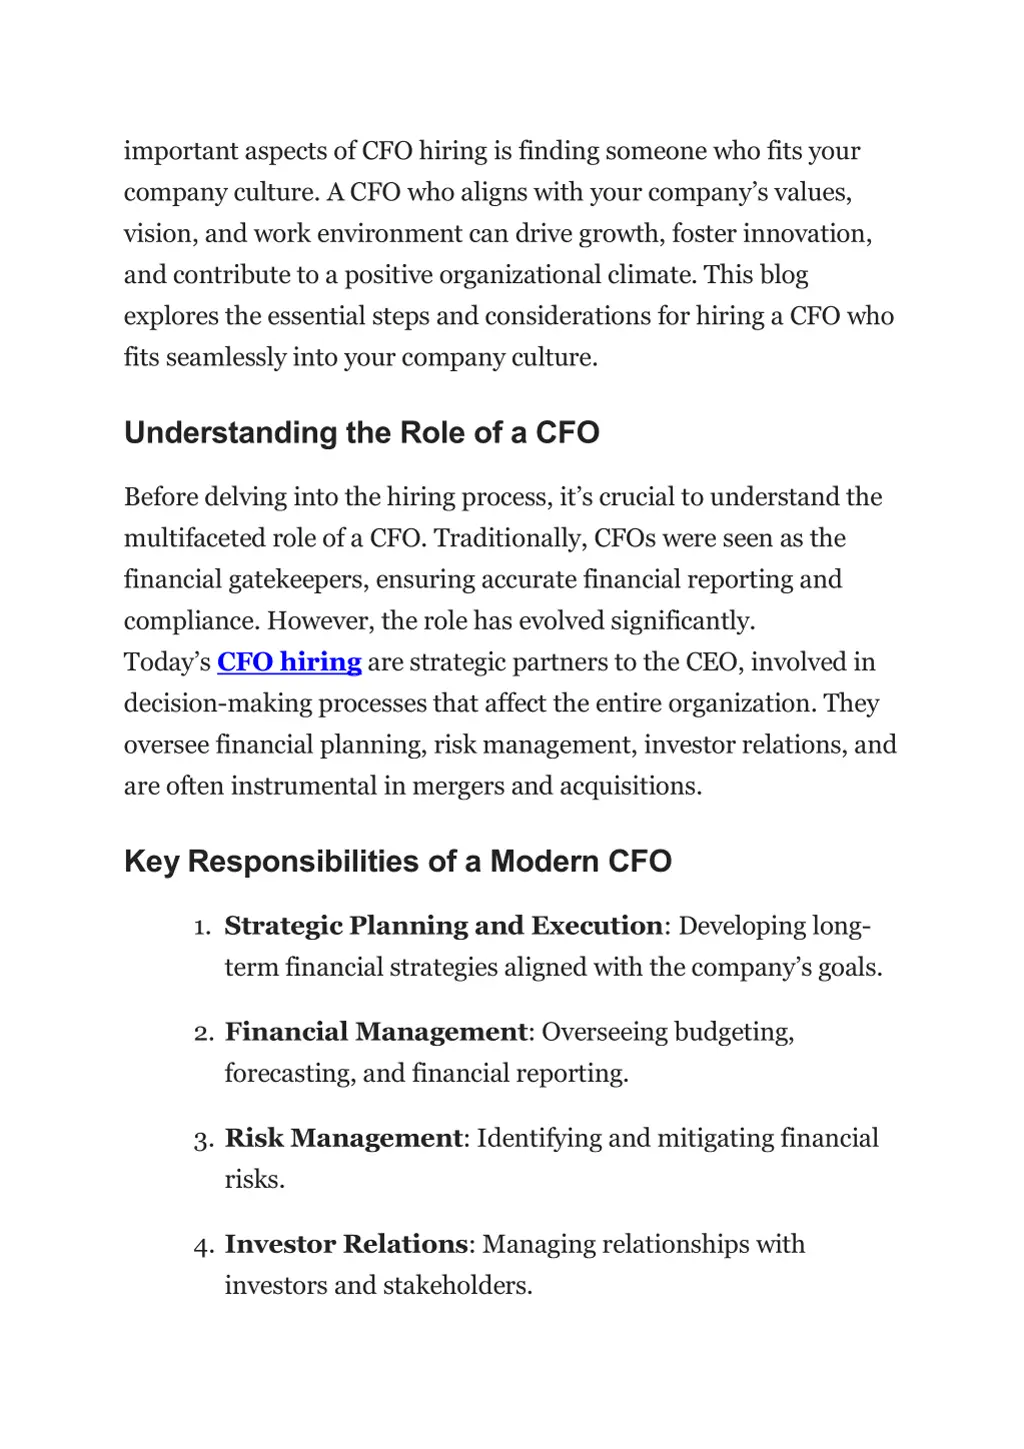 important aspects of cfo hiring is finding